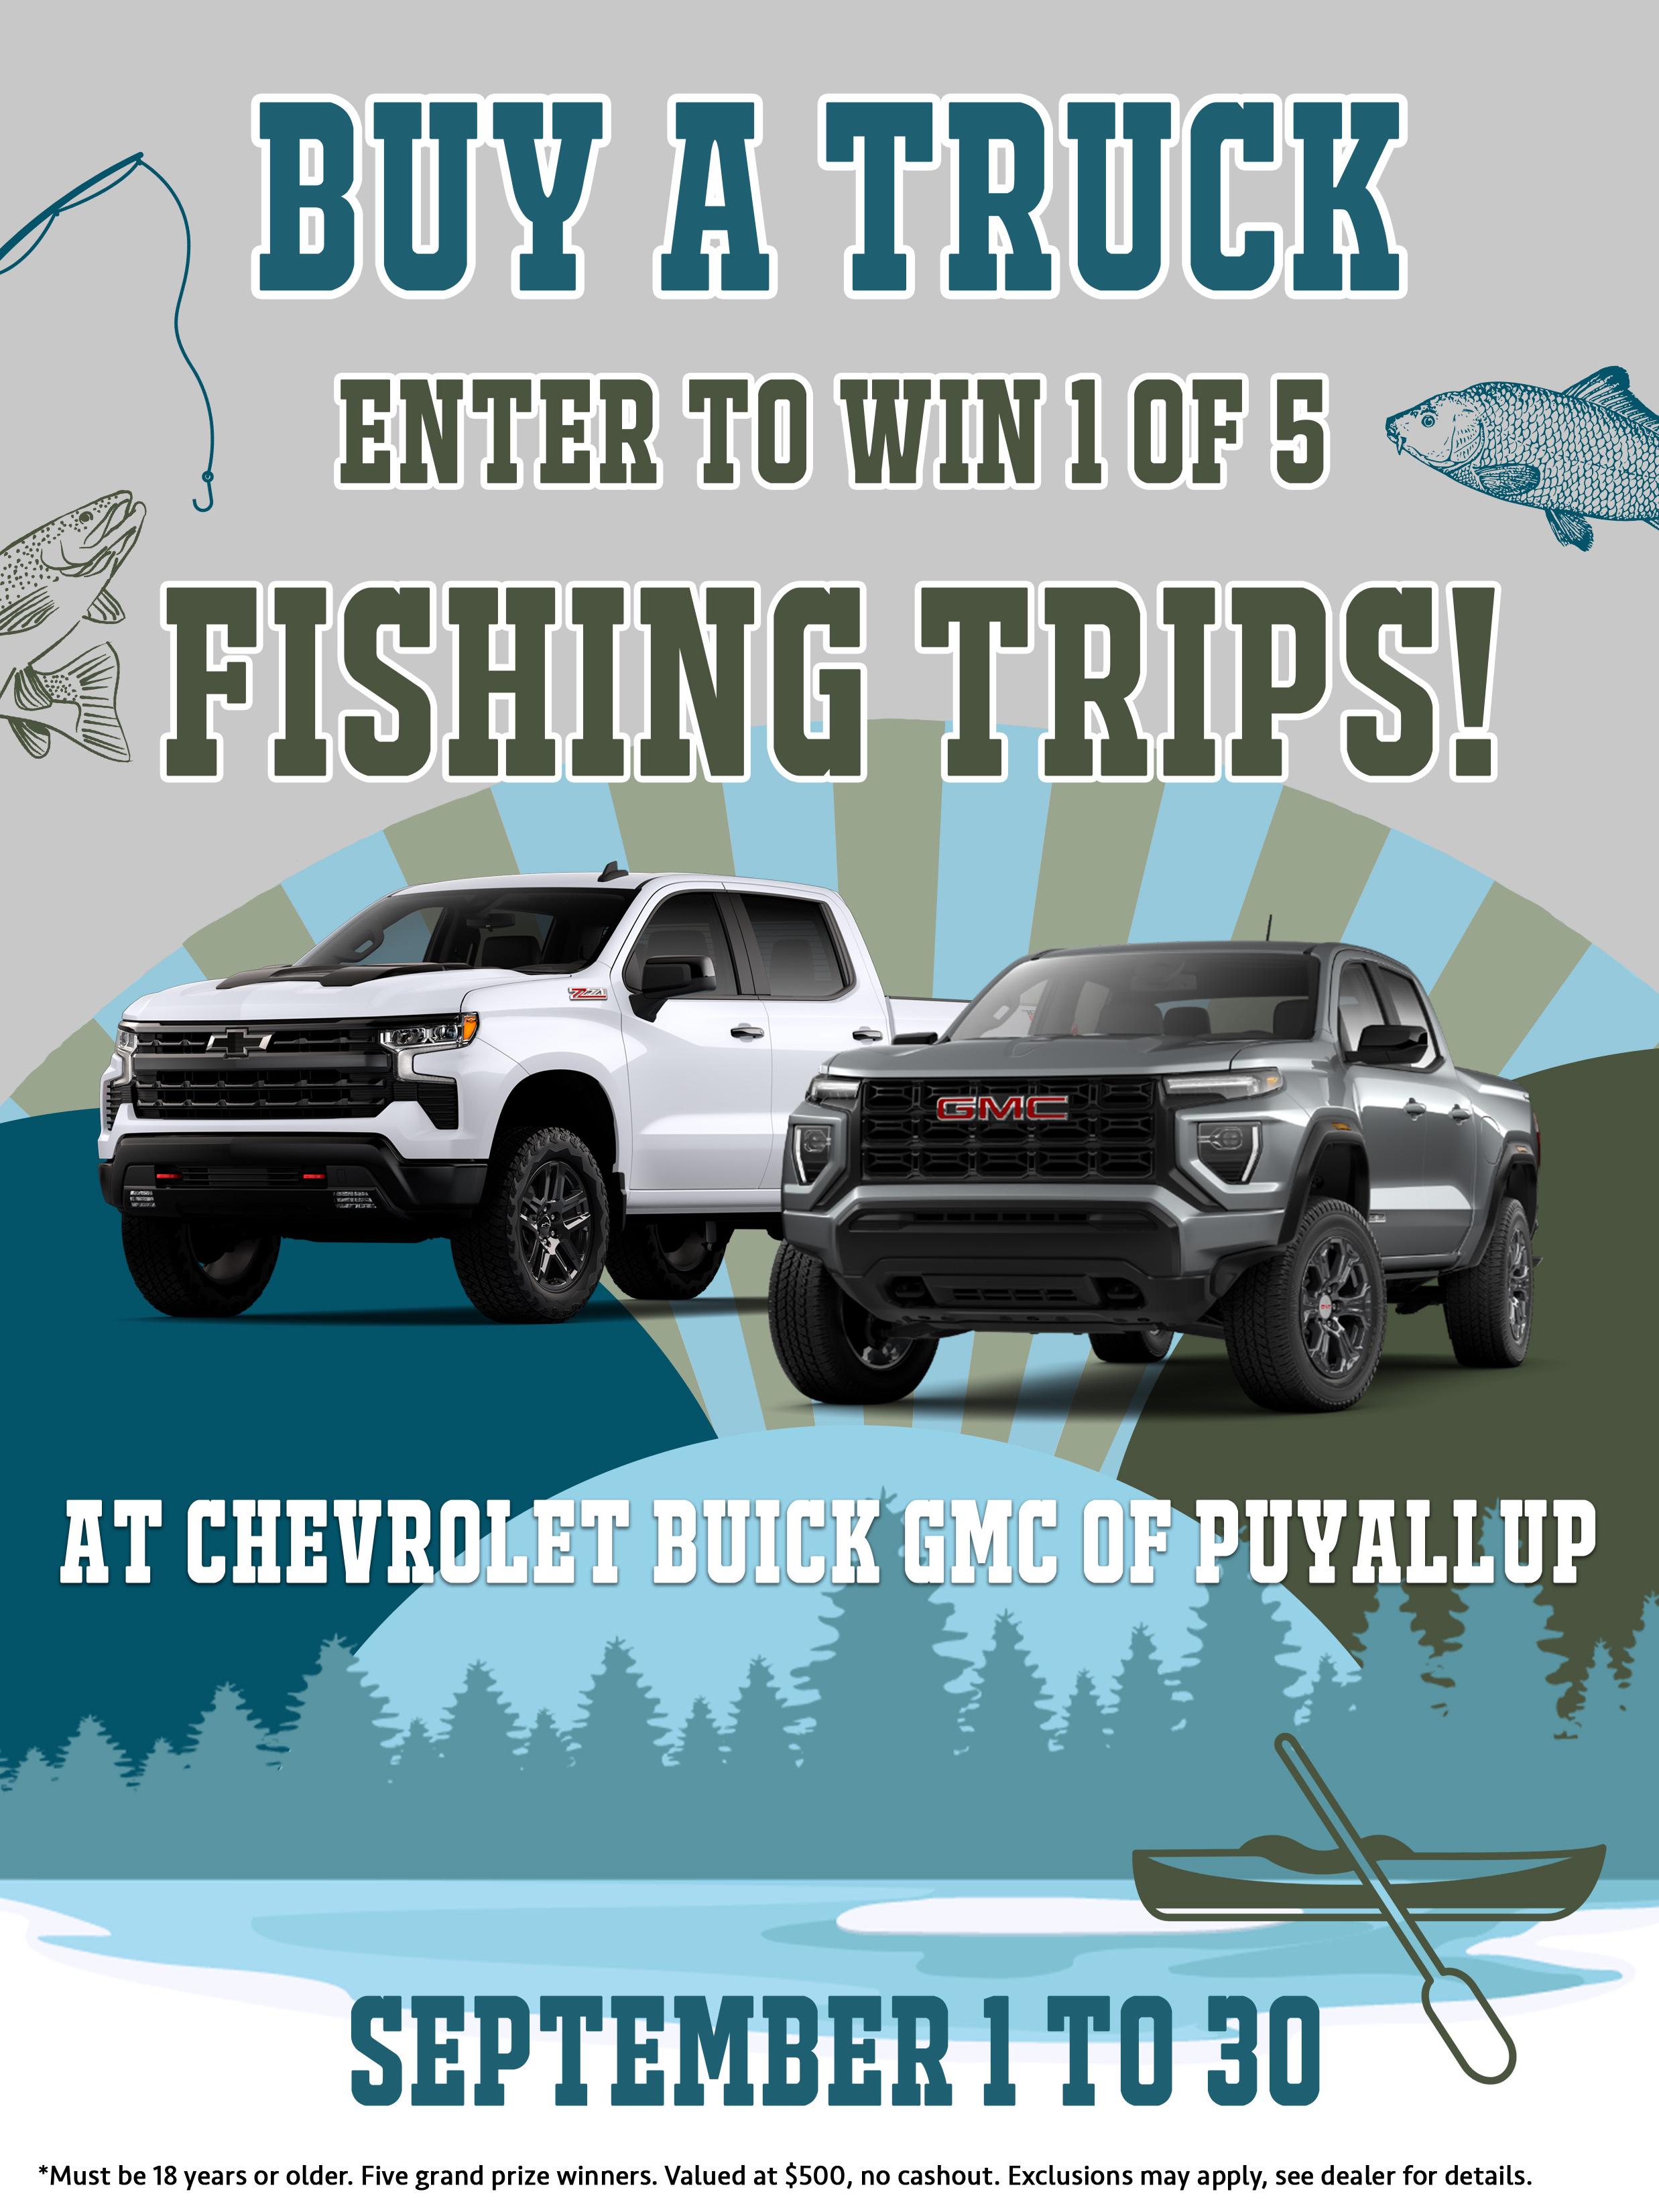 Buy a truck event to win 1 of 5 fishing trips